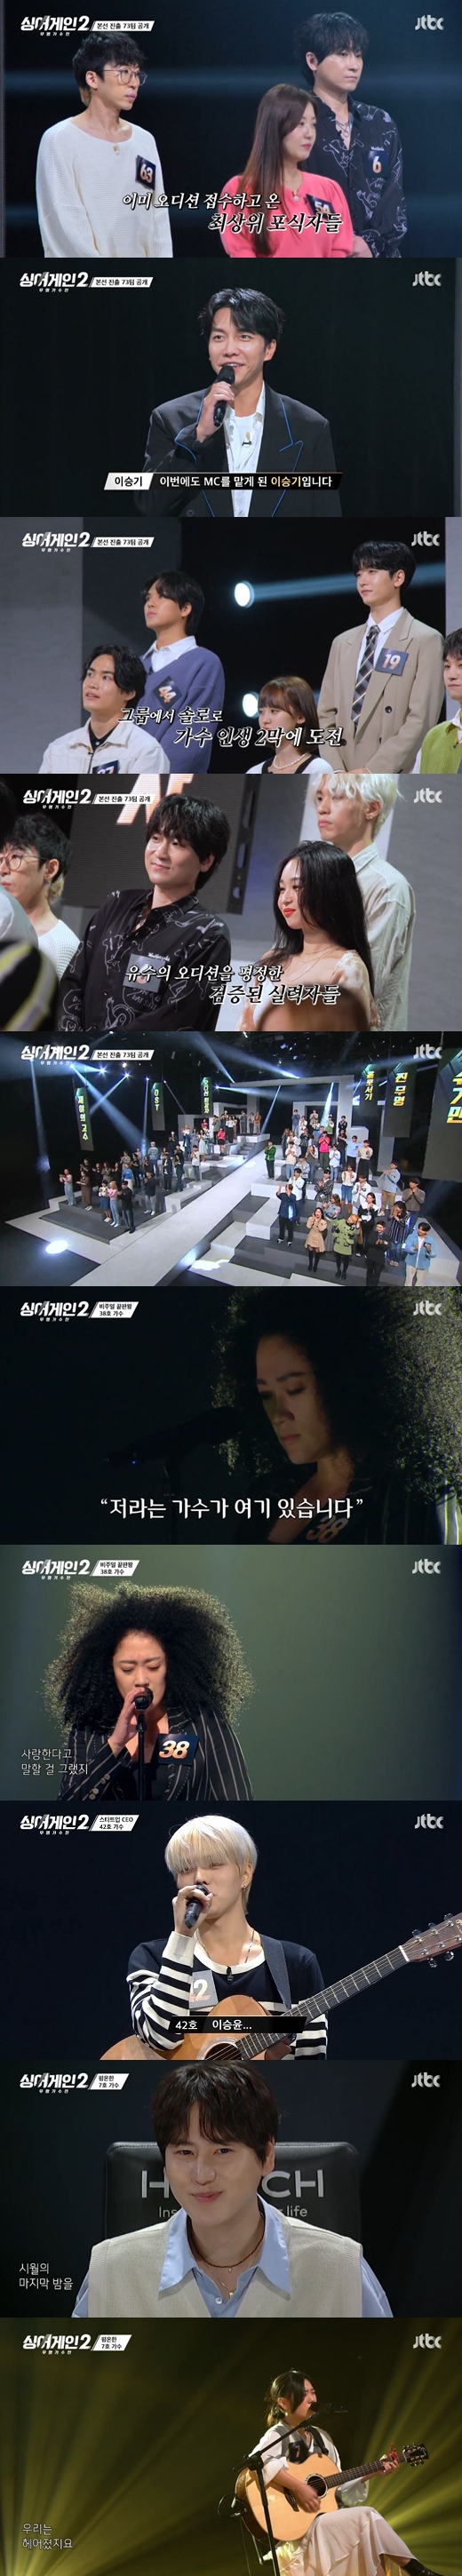 The big game of Sing Again Season 2-Unknown Singer has begun.On the night of the 6th, JTBCs new entertainment Singing Again Season 2-Unknown Singer was first broadcast.Sing Again 2 is an audition program that gives the stage a one more opportunity to let the desperate singers stand in front of the public again.Unknown singers tied to categories of Jaejaes Kosu, Sara Sugarman, OST, Audition Miniforce, and Hologi will perform The Stage of Impression.The 73-team team that made it to the finals will face each other in the first round group survival match. host Lee Seung-gi introduced the rule, saying, It will be called a number, not a name.The top 10 will be awarded a music release, a national tour, a top 3 30 million won, a massage chair, and a final winner 100 million won.Judge Lee Sun-hee, Yoo Hee-yeol, Yoon Do Hyun, Kim I-na, Cho Kyuhyun, Lee Hae-ri, Stern and Song Min-ho press the Again button on the unknown Singer who wants to see one more time, and if Again is 6 or more, pass, 4 and 5 are withholding, 3 or less are missing.Super Again, which relieves dropouts, is given one piece by one.27 The Higher of Jaya appeared with an old guitar; he played a sweet tone and went straight to the second round with 6 Again from the judges.Its a difficult rhythm, I was surprised to drag it all the way and make the headline twice, I was curious about the next stage, said Yoon Do Hyun.Lee Sun-hee, who was the only judge not to press Again, advised, I was sorry that I had to have more suction power because I liked all the tablework, beauty, vibration and guitar performances.With the introduction of Beauty Jazz Singer, the 38th staged, which was called Top Model to announce jazz, was put on hold after receiving 5 Again.Cho Kyuhyun said: The results are so curious.I started to control the strength and started to listen to the neck sound, but I was going to take the in-ear, but I was horrified by shooting through the speaker. Followed by a judge, 42, who majored in business administration at Korea University and was the CEO of PinTech Startup.I was always worried when I lived when I said, Lee Seung-yoon is ambiguous when he defines me. Theres so much I want to do, said Cho Kyuhyun, who laughed when he said he was envy towards No 42.The 7th, which recorded the first All Again by selecting the forgotten season, finally blushed.The neck of Gods blessing, said Yoon Do Hyun, who also praised him for putting it on the playlist and listening every night.The Sara Sugarman group featured a large familiar face that made the judges nervous.Singer Moses, who swept the top of the coloring chart through his representative song Love Girl, found Sing Again 2 as the 24th unknown singer.Lee Sun-hee said, I felt so much about what I was feeling when I was touching my neck after the song, it seems to show that I still have it for my favorite fan.Duo Shin Hyun-hee and singer Shin Hyun-hee from Kim Root returned as the 4th unknown singer. I wanted to play music in college in my hometown.I auditioned and did various reckless Top Models through bus kings. He said, I was a reckless Top Model, but when I was doing such activities, I became a coward.I want to regain my passion again, he said, showing off his rusty singing skills with Shin Hyun-hee and Kim Roots brother .No.3 Singer Juniper from Guam passed the first round, singing Tears Shelled from the End of the Sky.Audition Miniforce group gathered talented people who won various auditions.The 22nd, which surprised everyone from the appearance, was Singer Ulala Session from Mnet Superstar K 3.Park Seung-il mentioned the late leader Lim Yoon-taek, who died too soon, saying, I was wandering a lot when I left Yoon Taek, who led us after winning the audition program.Kim Myung-hoon said, I felt like I was losing my real appearance because I was soaked in others. I participated to convey the stage and song that I enjoyed once again.22 won 6 Again, leading to the Top Model in the second round; Song Min-ho said: Thank you for seeing a funny performance.Its a knife gunmuda, and Lee Hae-ri laughed, saying it was unique.On the other hand, JTBC Sing Again Season 2 - Unknown Singer is broadcast every Monday at 9 pm.